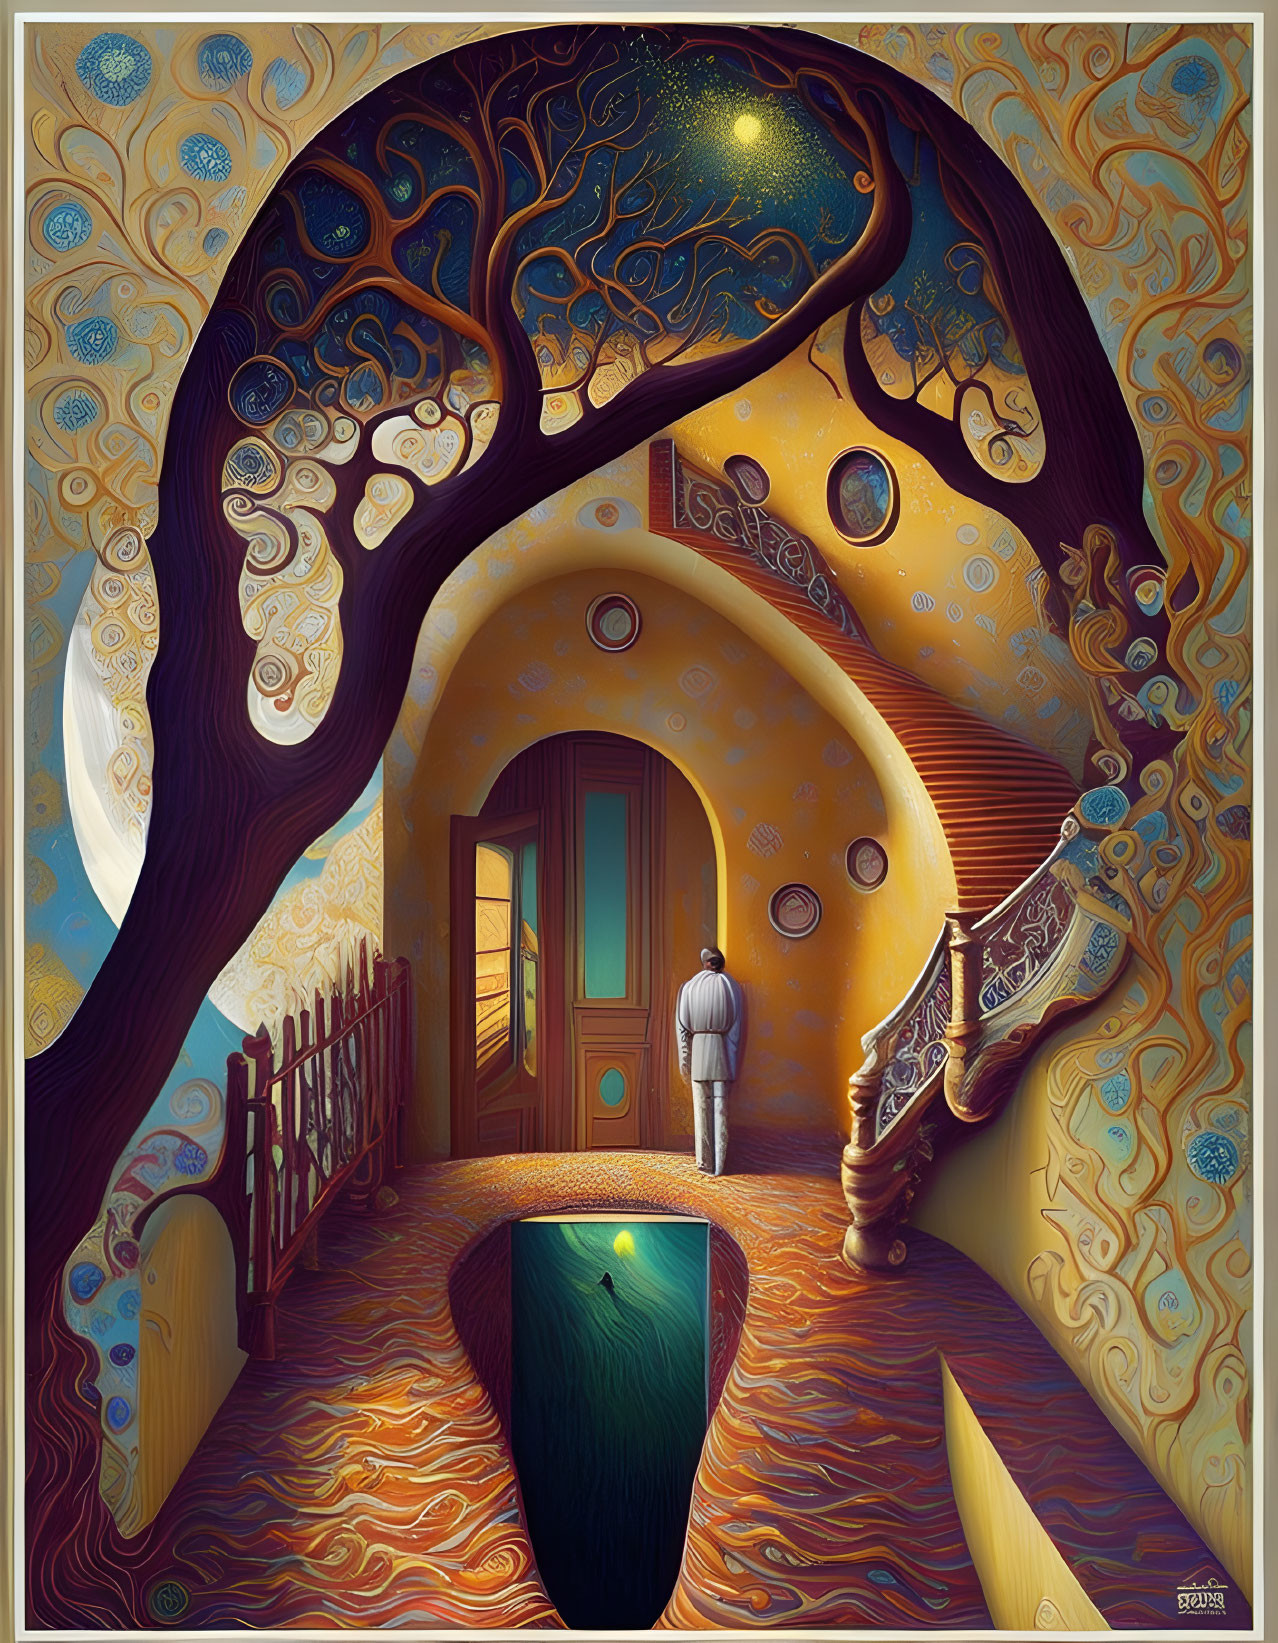 Surrealist image: person, whimsical house, golden swirls, ladder to starry sky